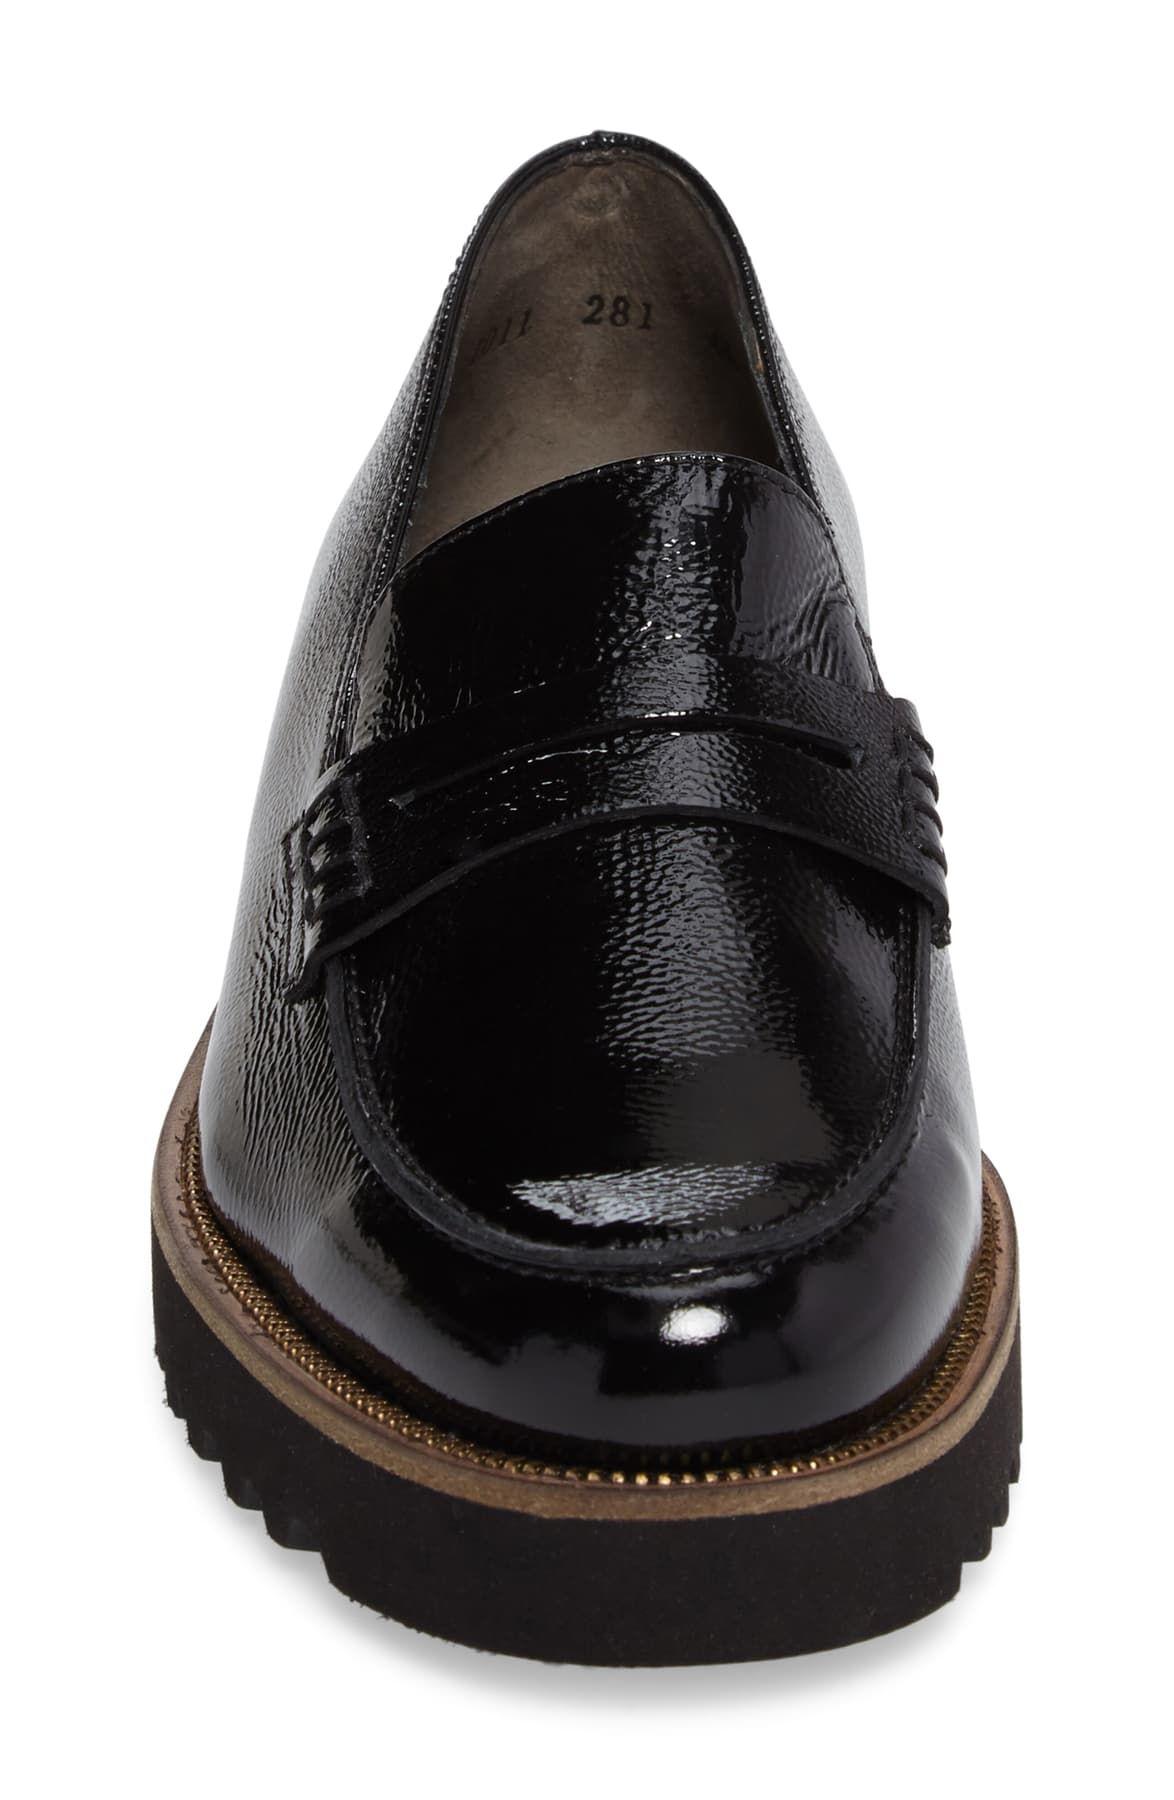 Paul Green Natasha Loafer Top Sellers, SAVE 60% - lutheranems.com